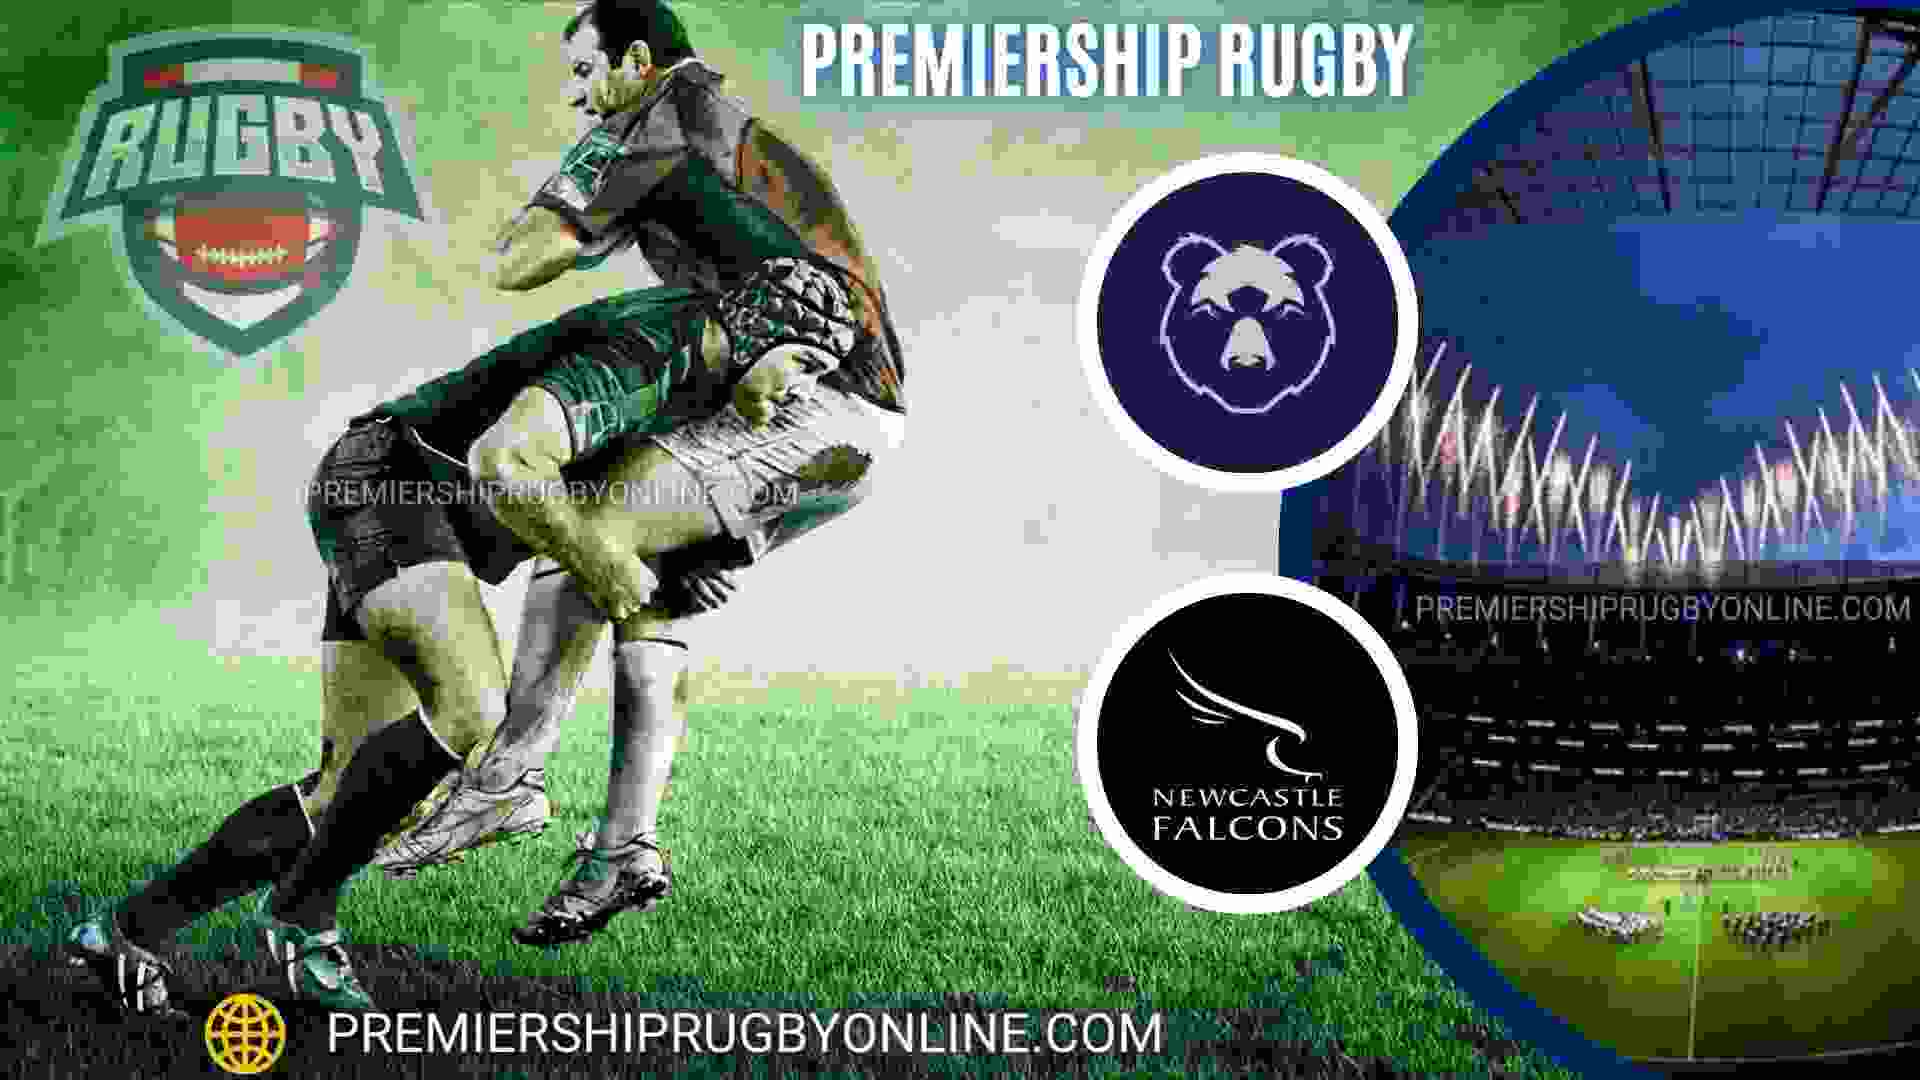 live-bristol-rugby-vs-newcastle-falcons-online